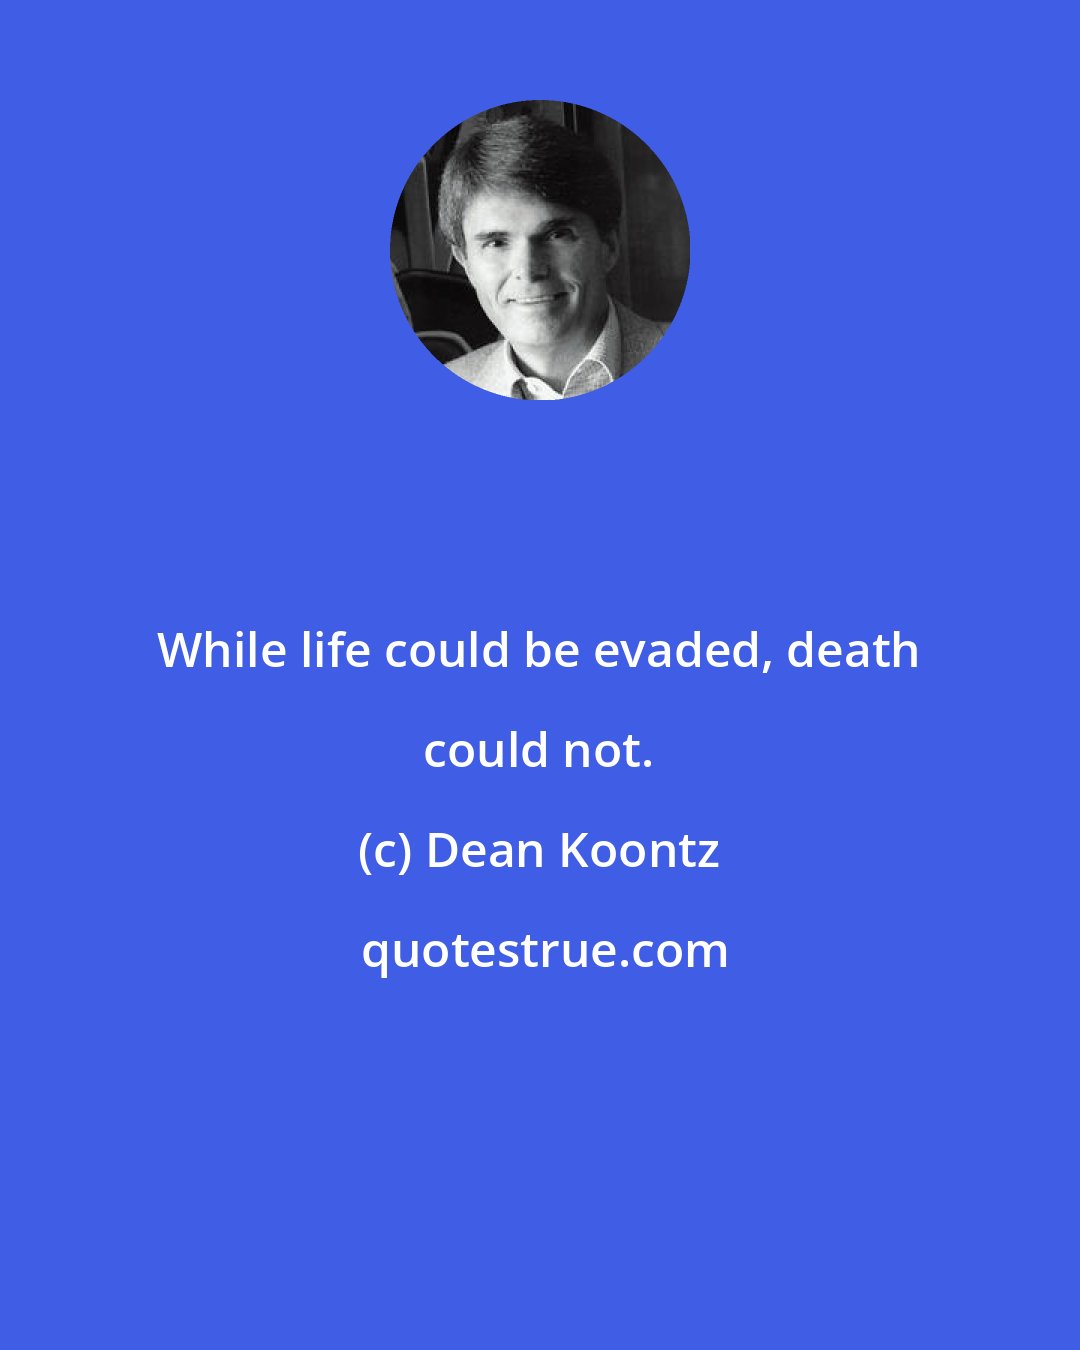 Dean Koontz: While life could be evaded, death could not.